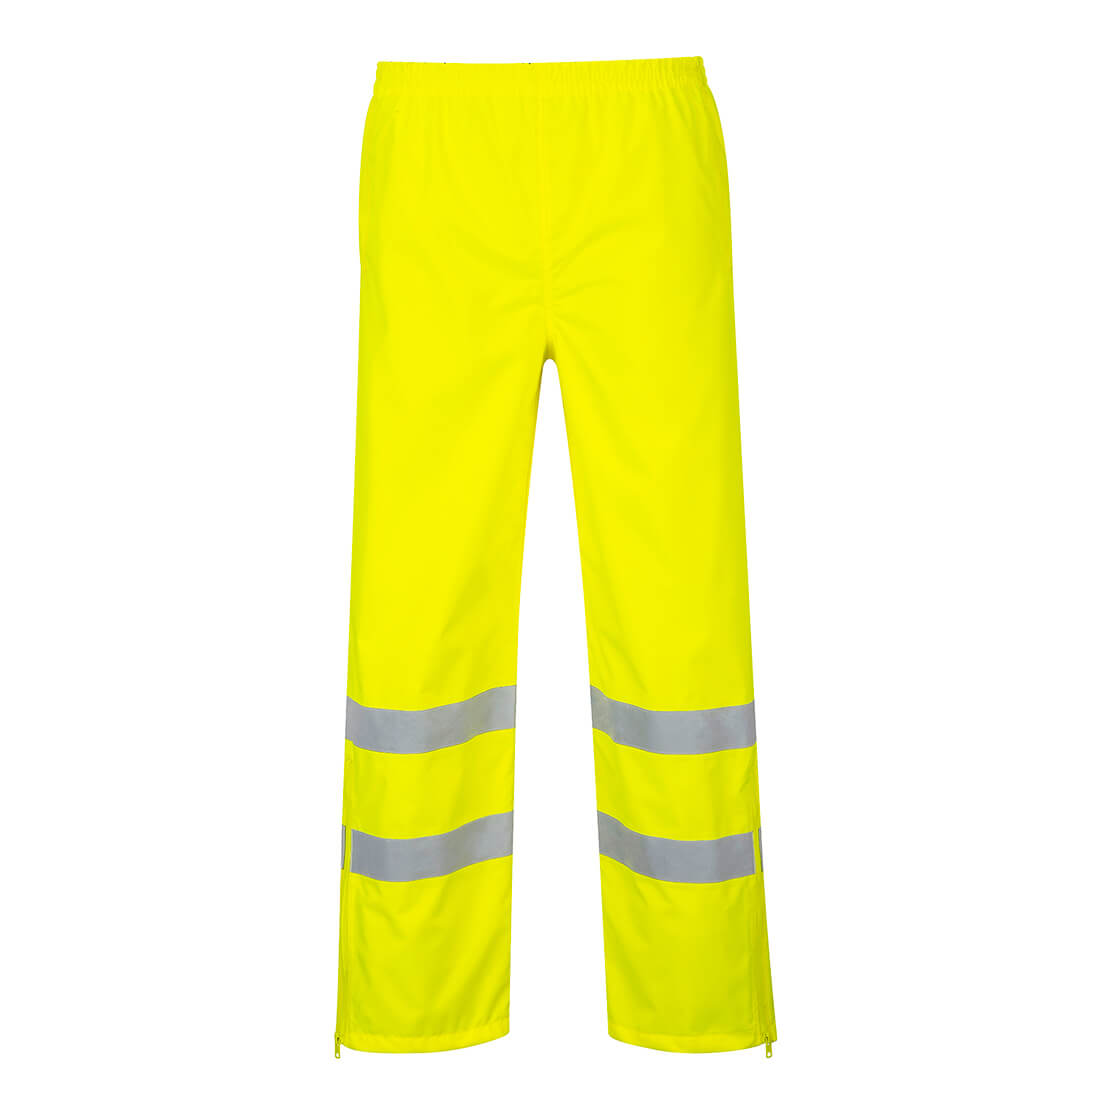 Image of Oxford Weave 300D Class 1 Breathable Hi Vis Breathable Trousers Yellow S